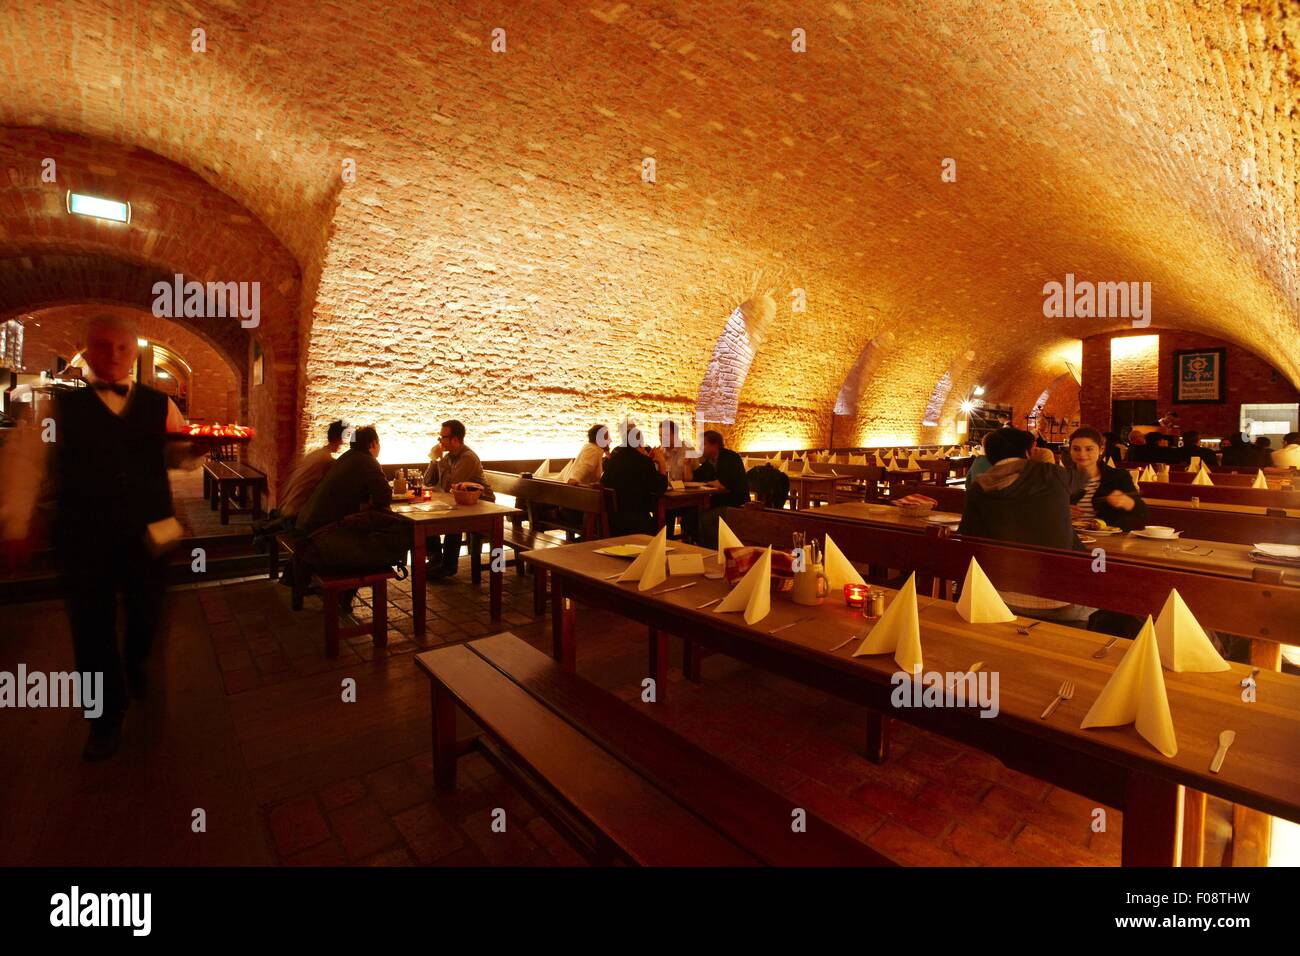 People dining at Augustiner Keller, Munich, Germany Stock Photo